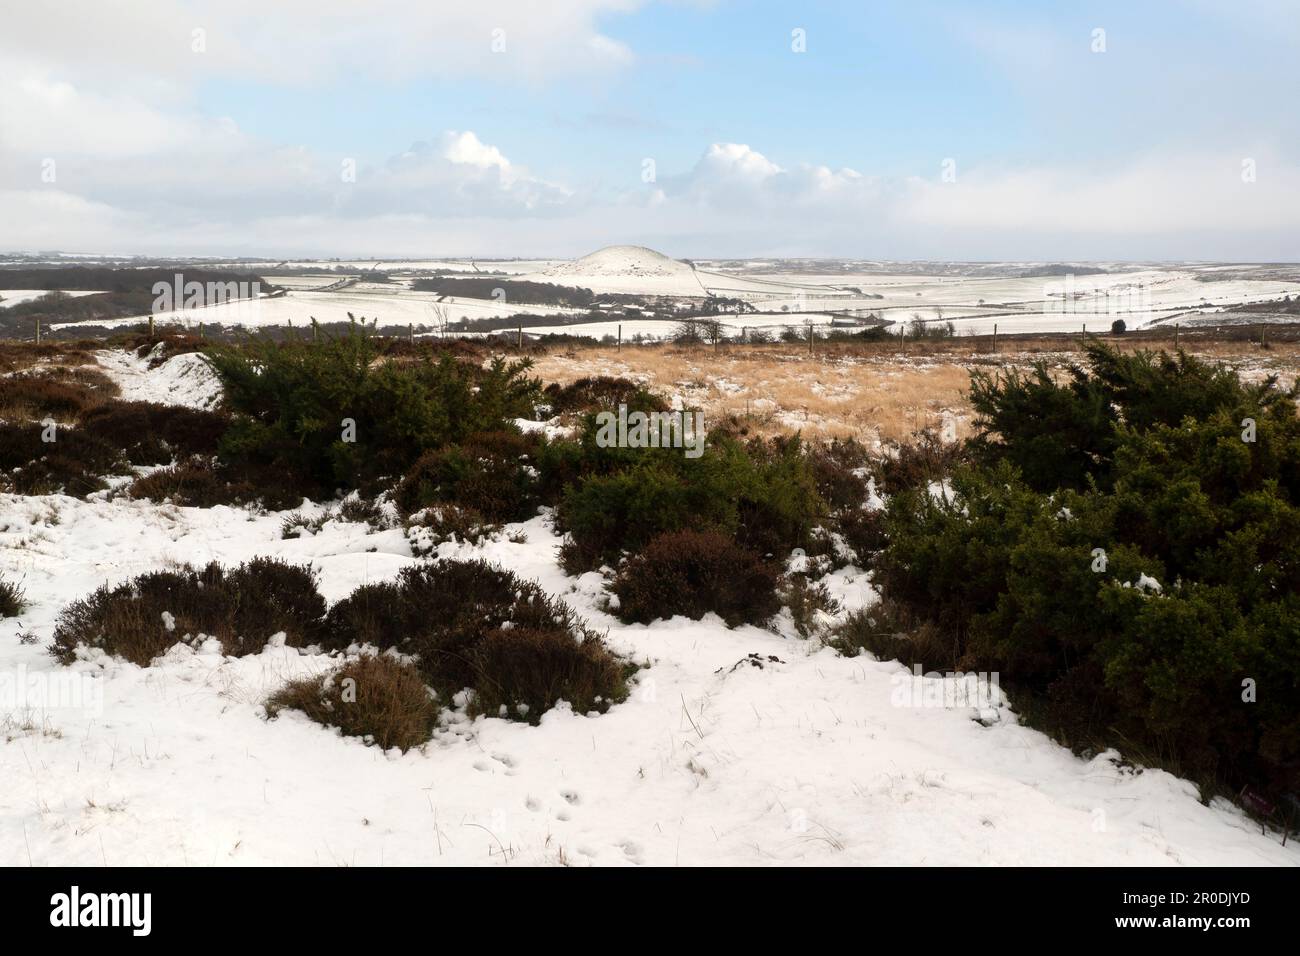 Freeborough Hill, in the Snow, North Yorkshire Moors Stock Photo